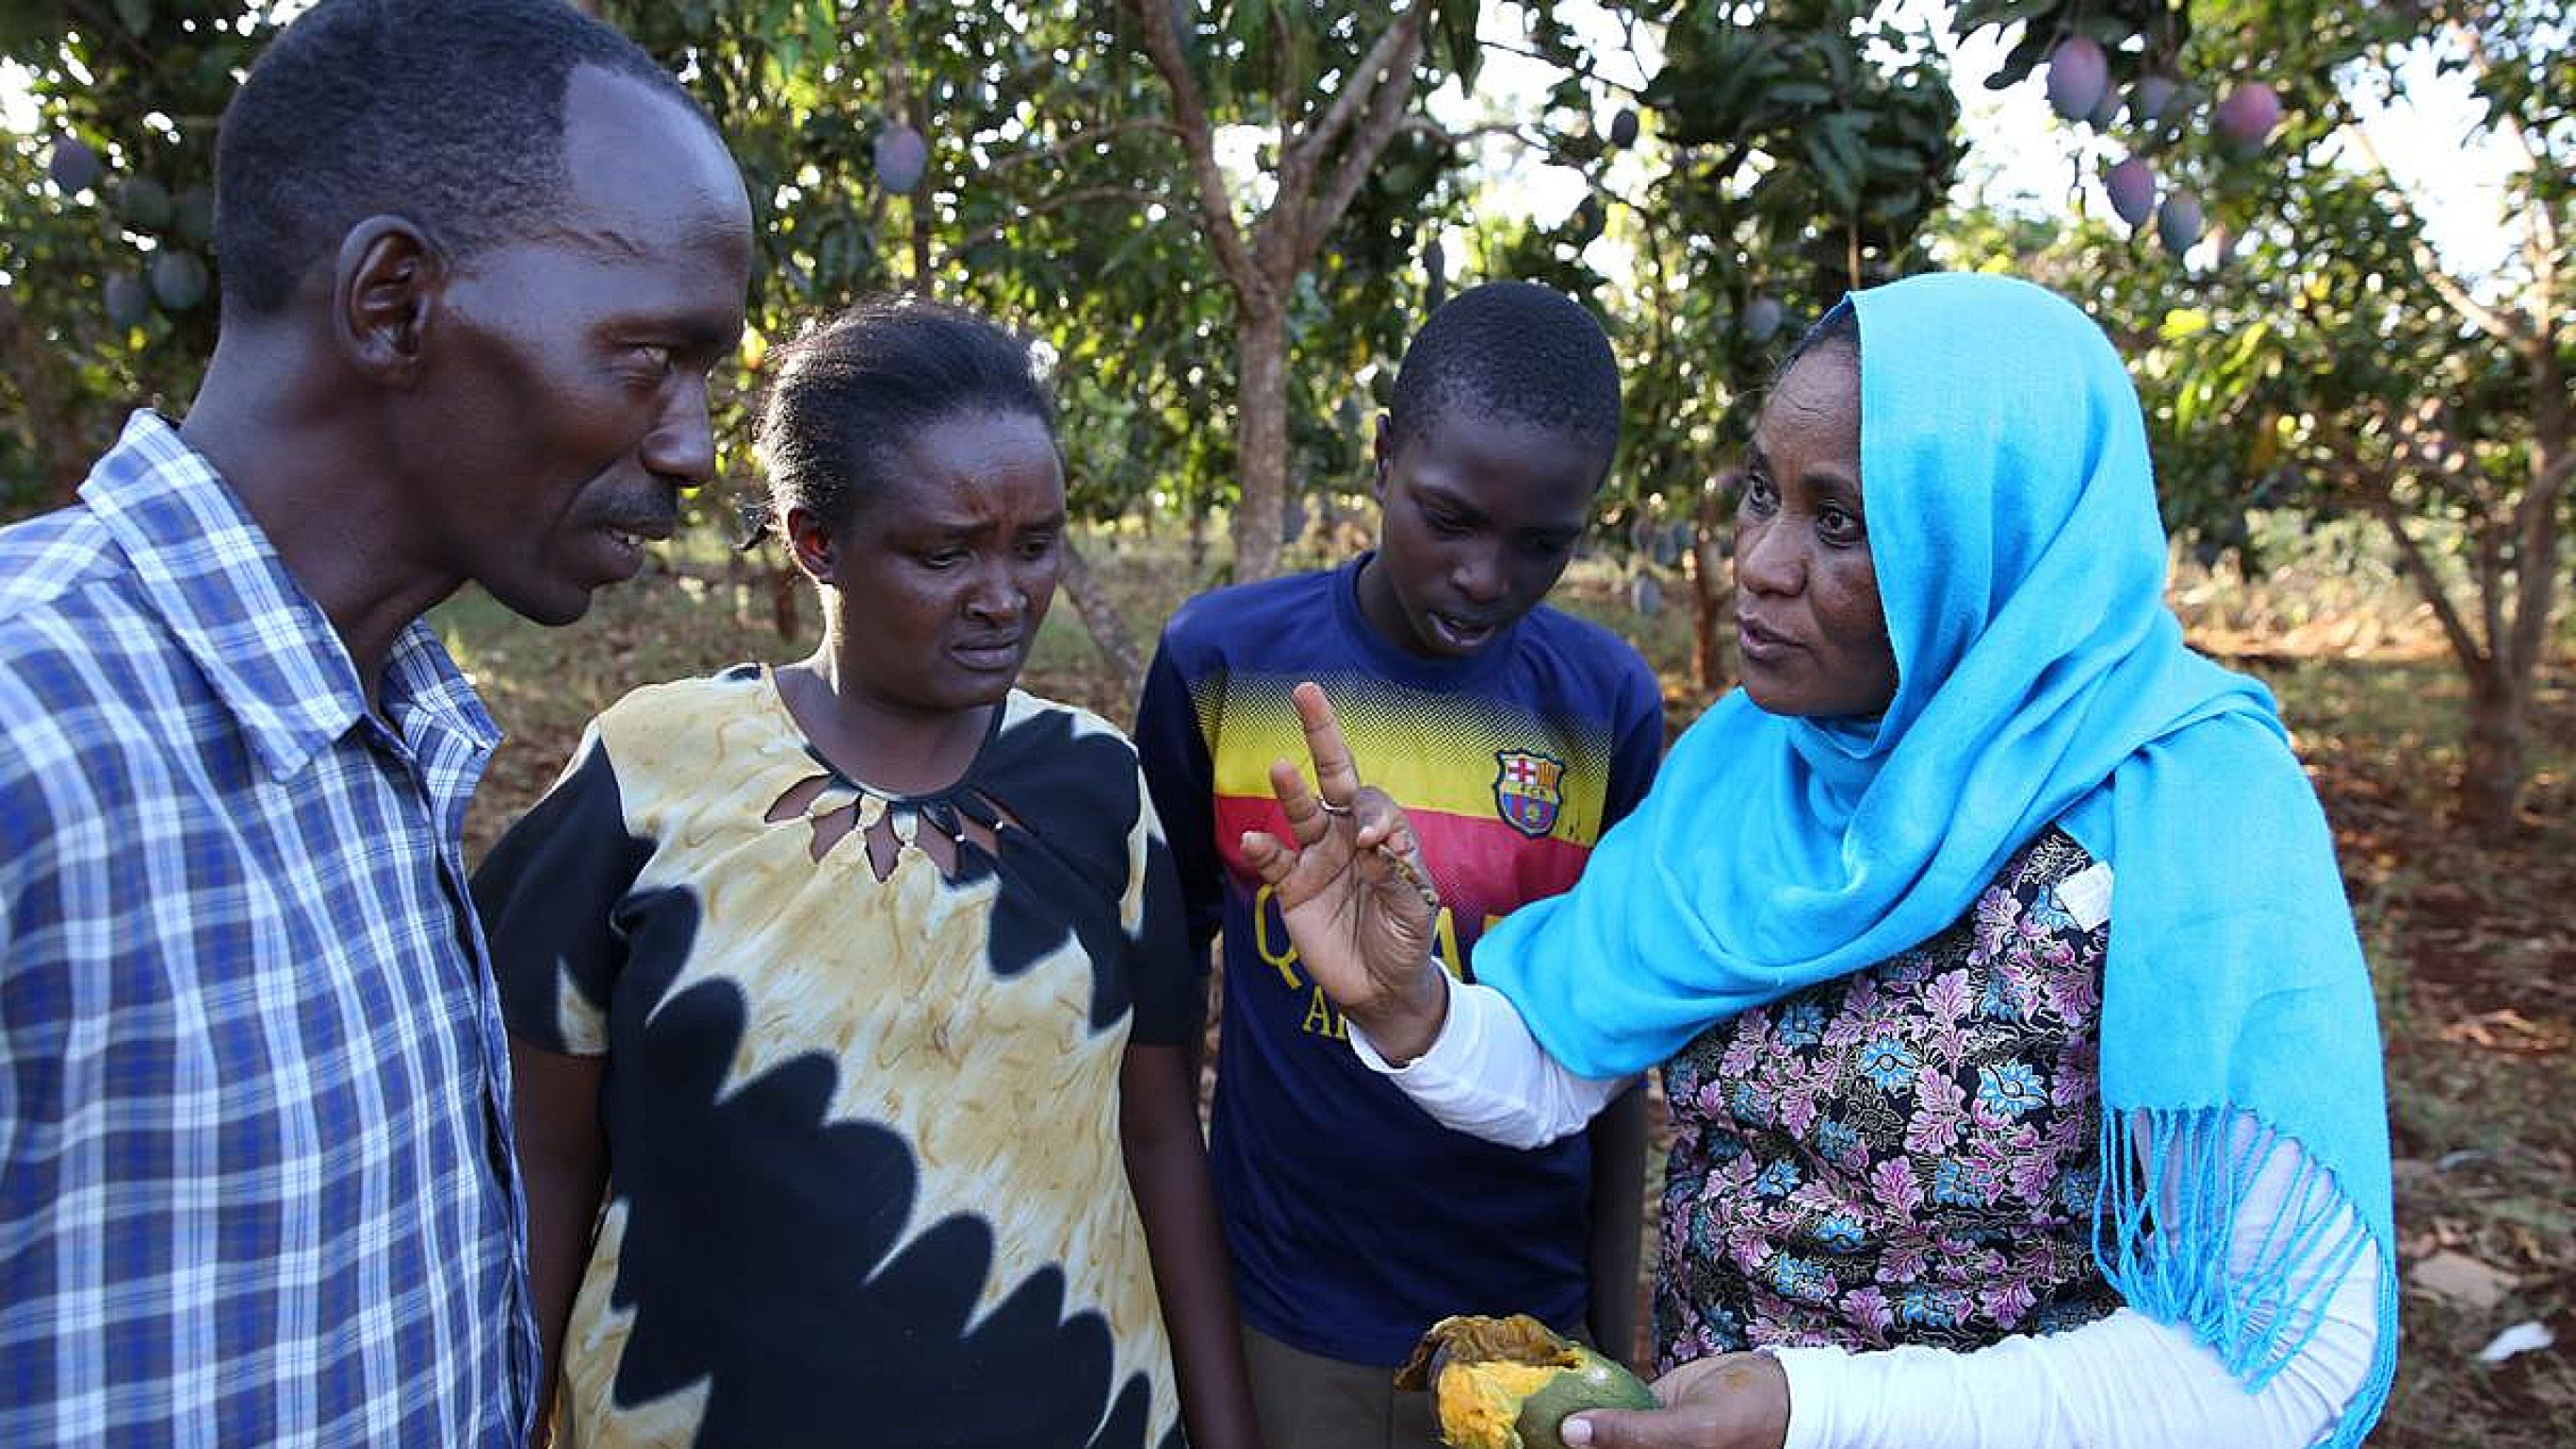 Dr. Samira A. Mohamed, fruit fly specialist from icipe, gives mango farmers an introduction to IPM methods.